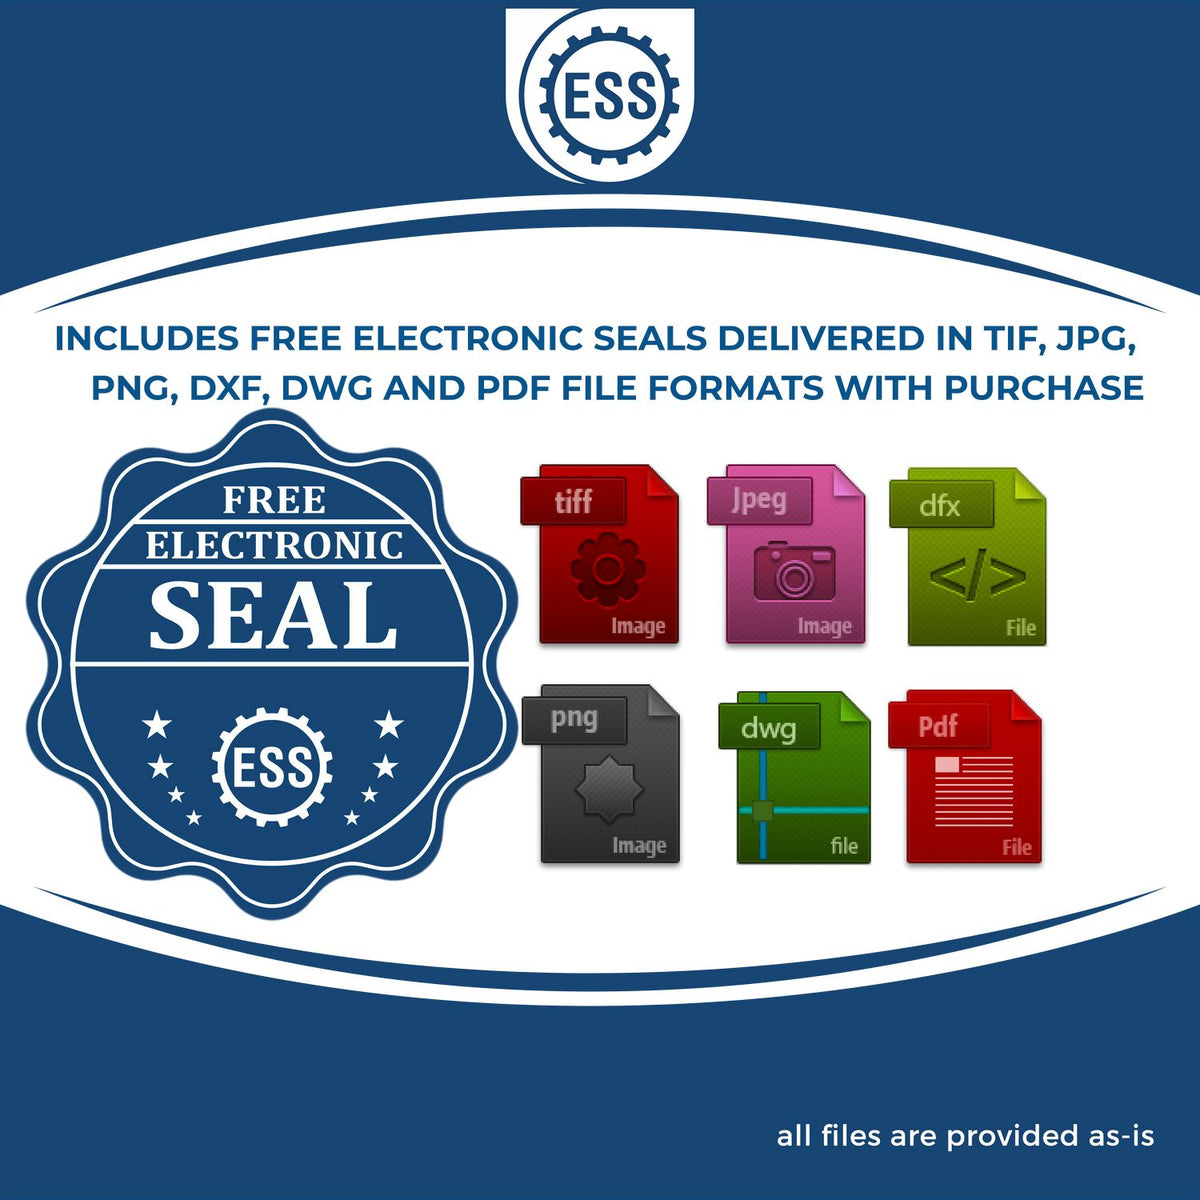 An infographic for the free electronic seal for the Heavy Duty Cast Iron Arizona Architect Embosser illustrating the different file type icons such as DXF, DWG, TIF, JPG and PNG.